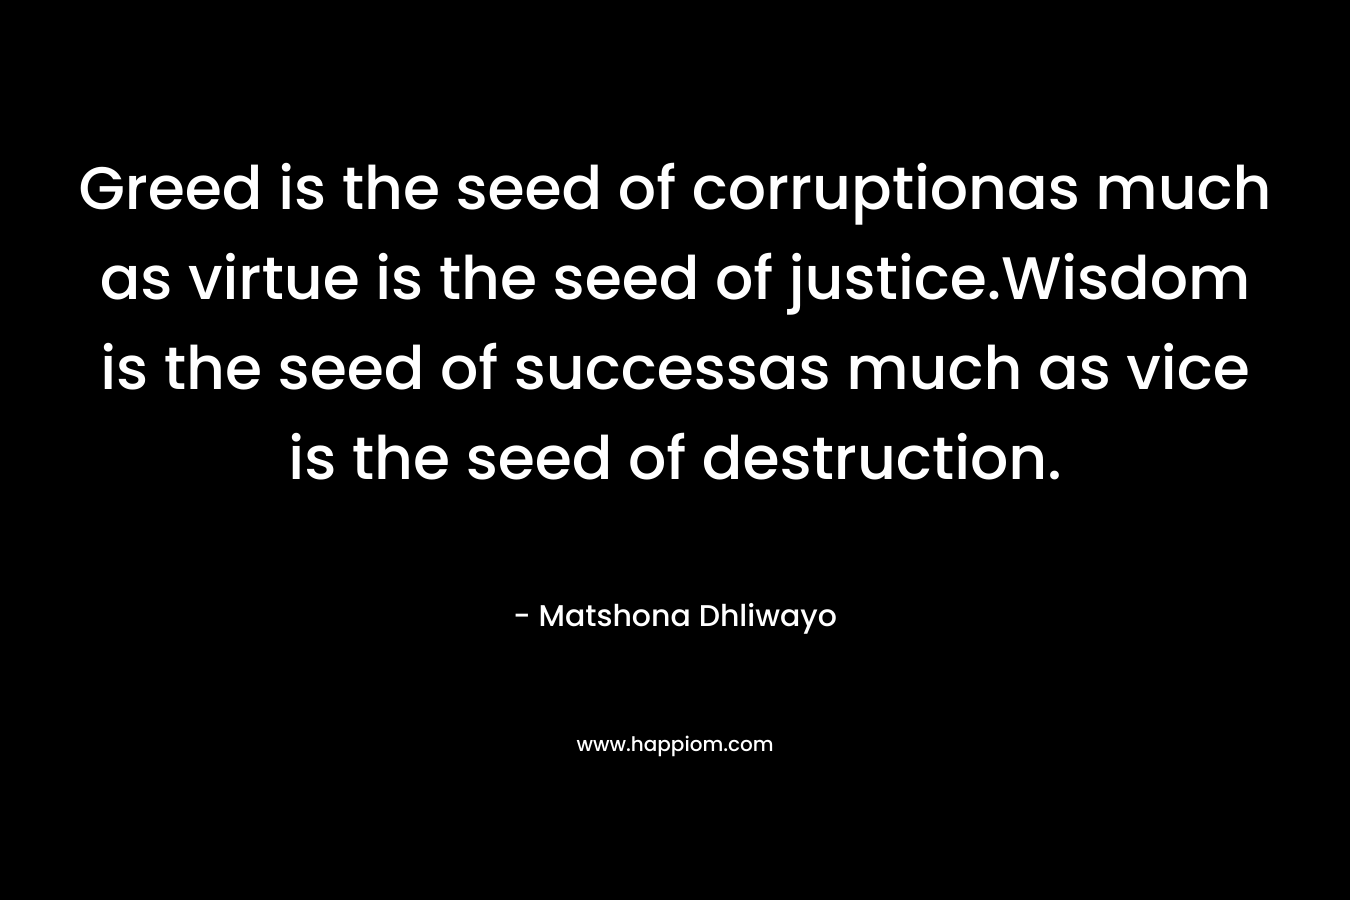 Greed is the seed of corruptionas much as virtue is the seed of justice.Wisdom is the seed of successas much as vice is the seed of destruction. – Matshona Dhliwayo